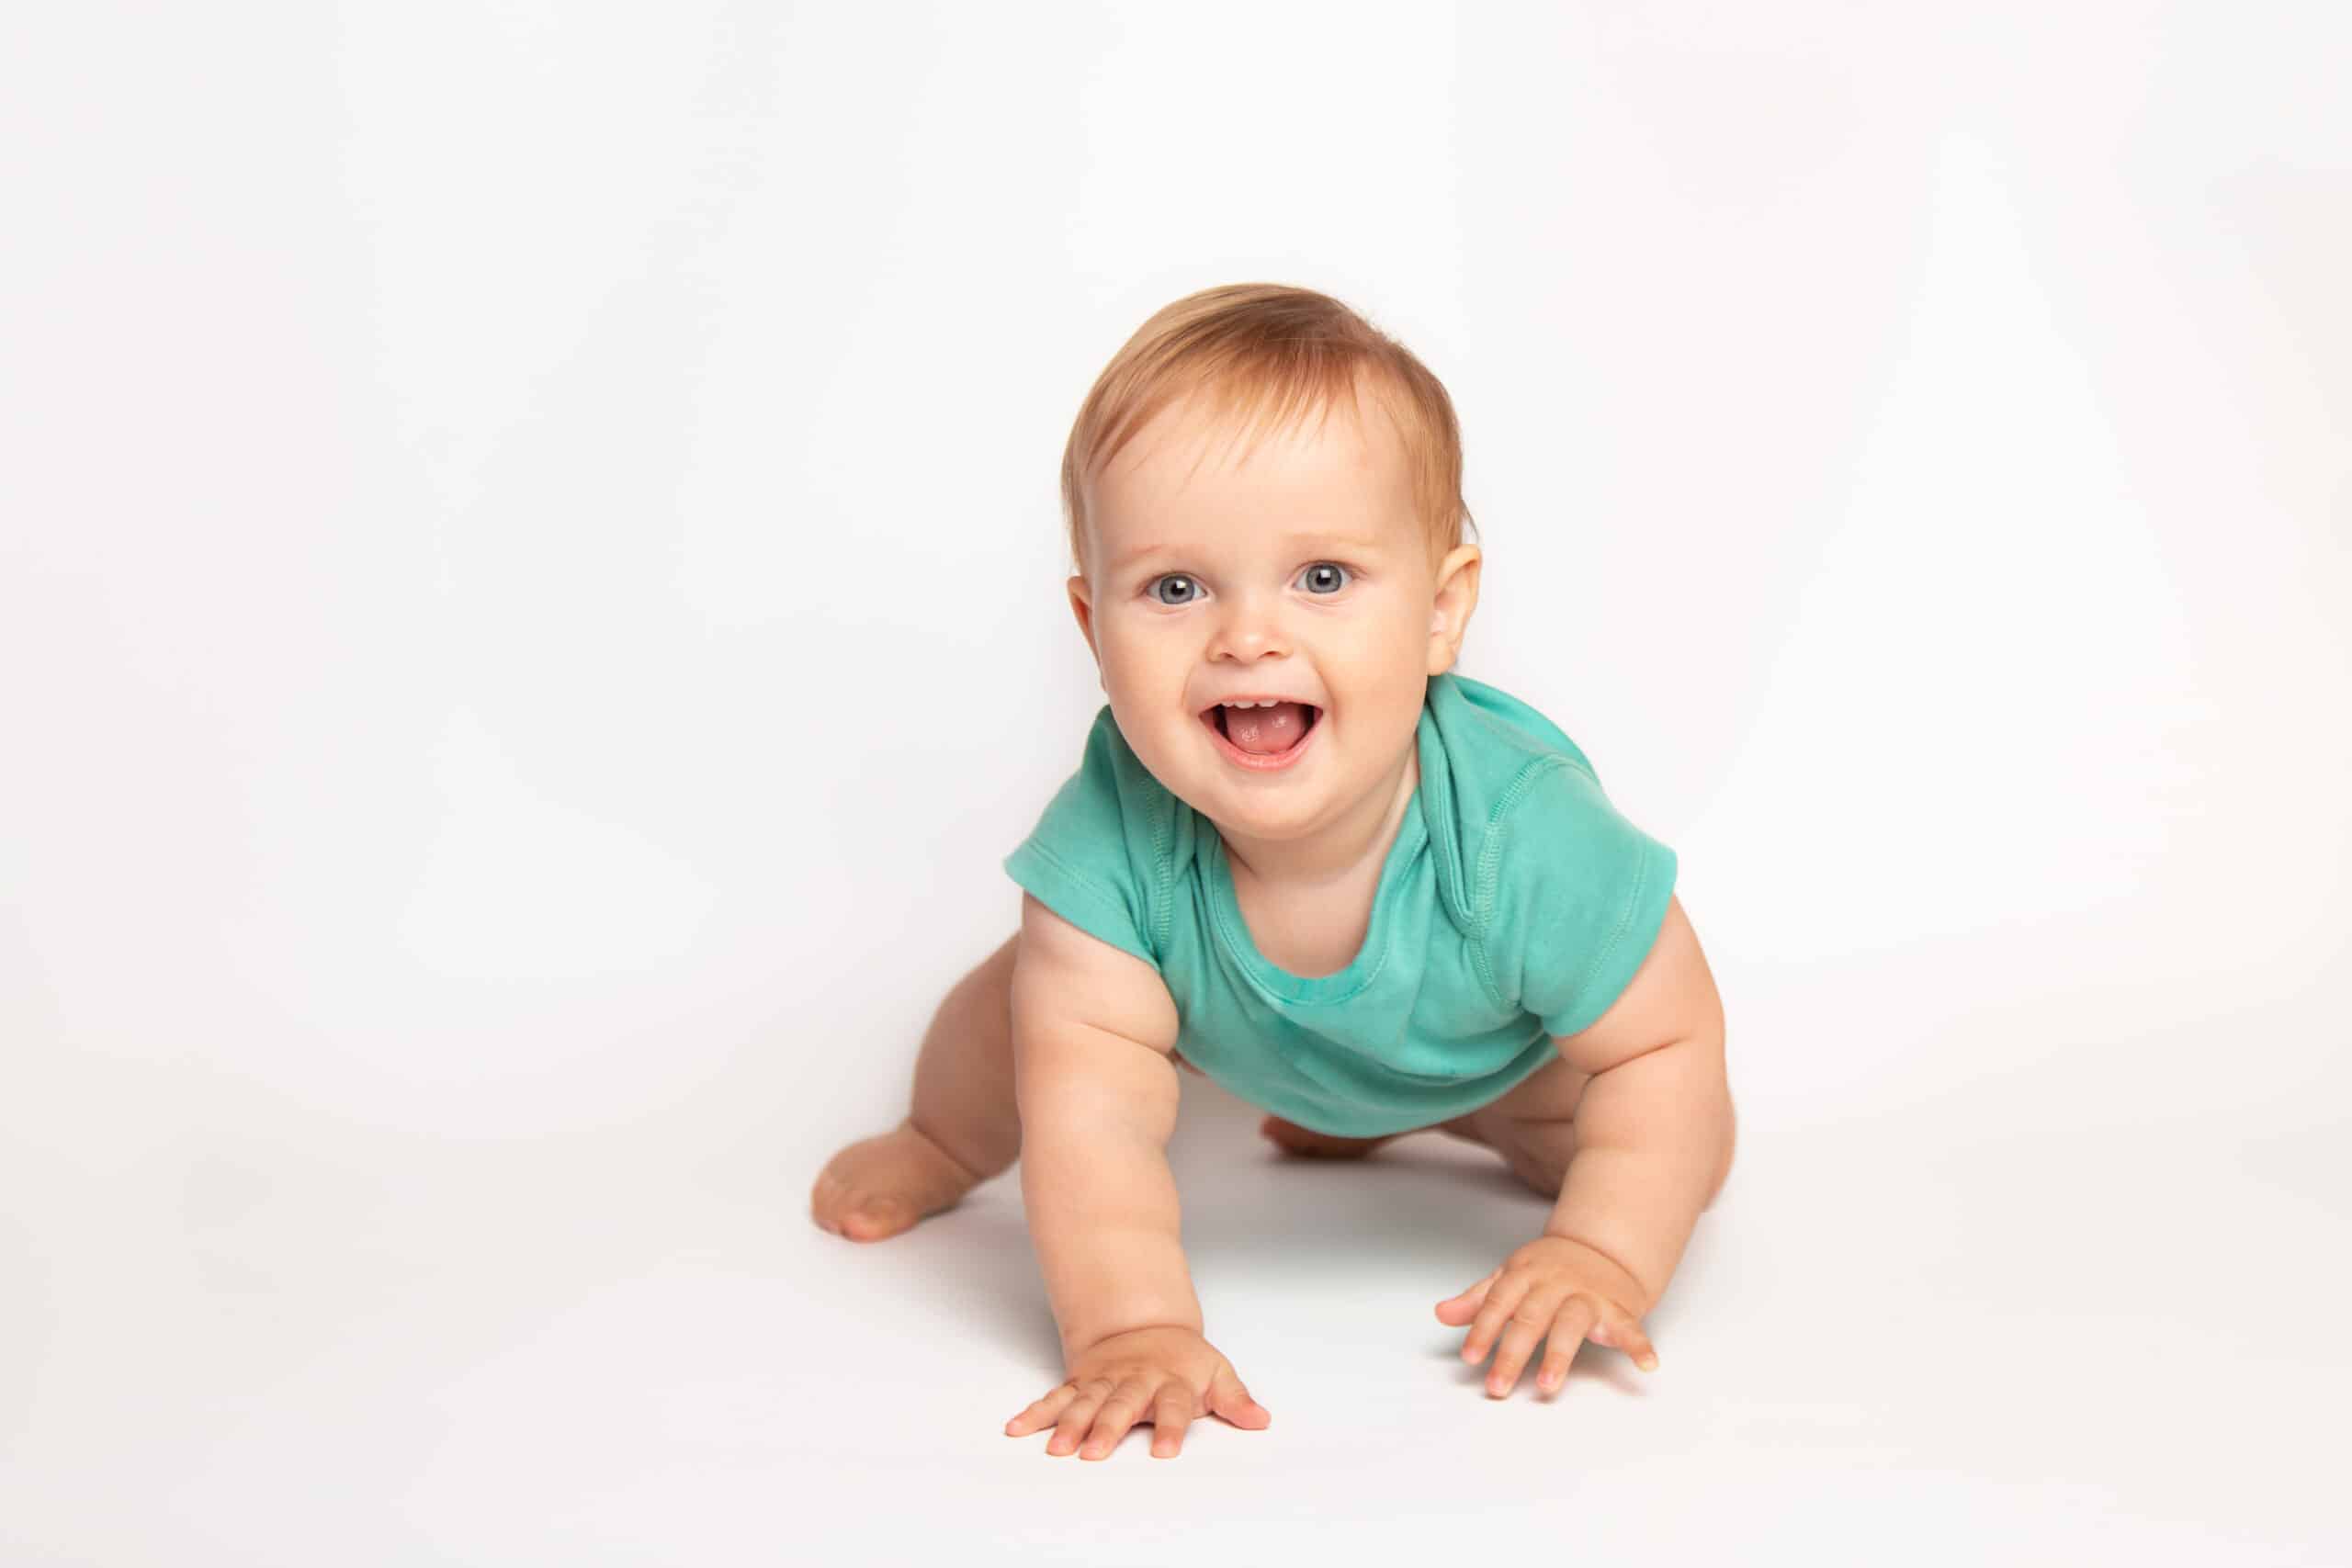 Cute small caucasian toddler baby boy child crawl on white studio floor. Smiling little infant kid wearing a green t-shirt explore world. Childcare and upbringing concept.